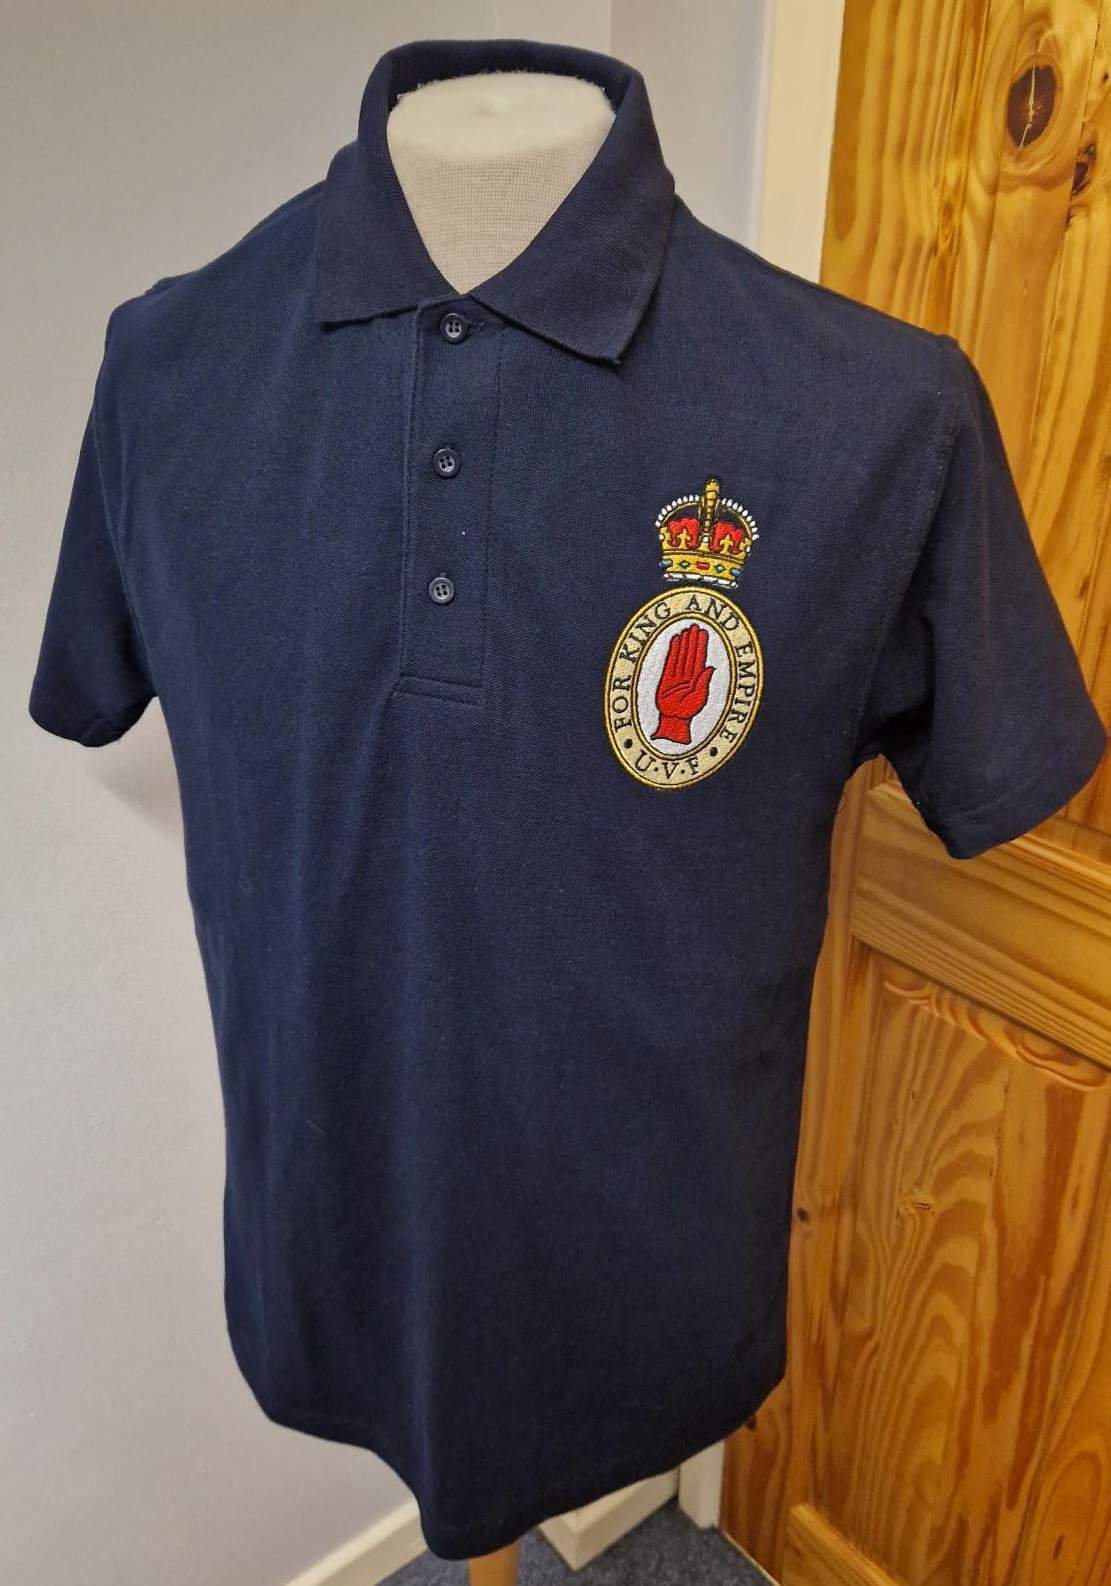 Polo Shirt with UVF – For King & Empire logo | Victor-Stewart Enterprises